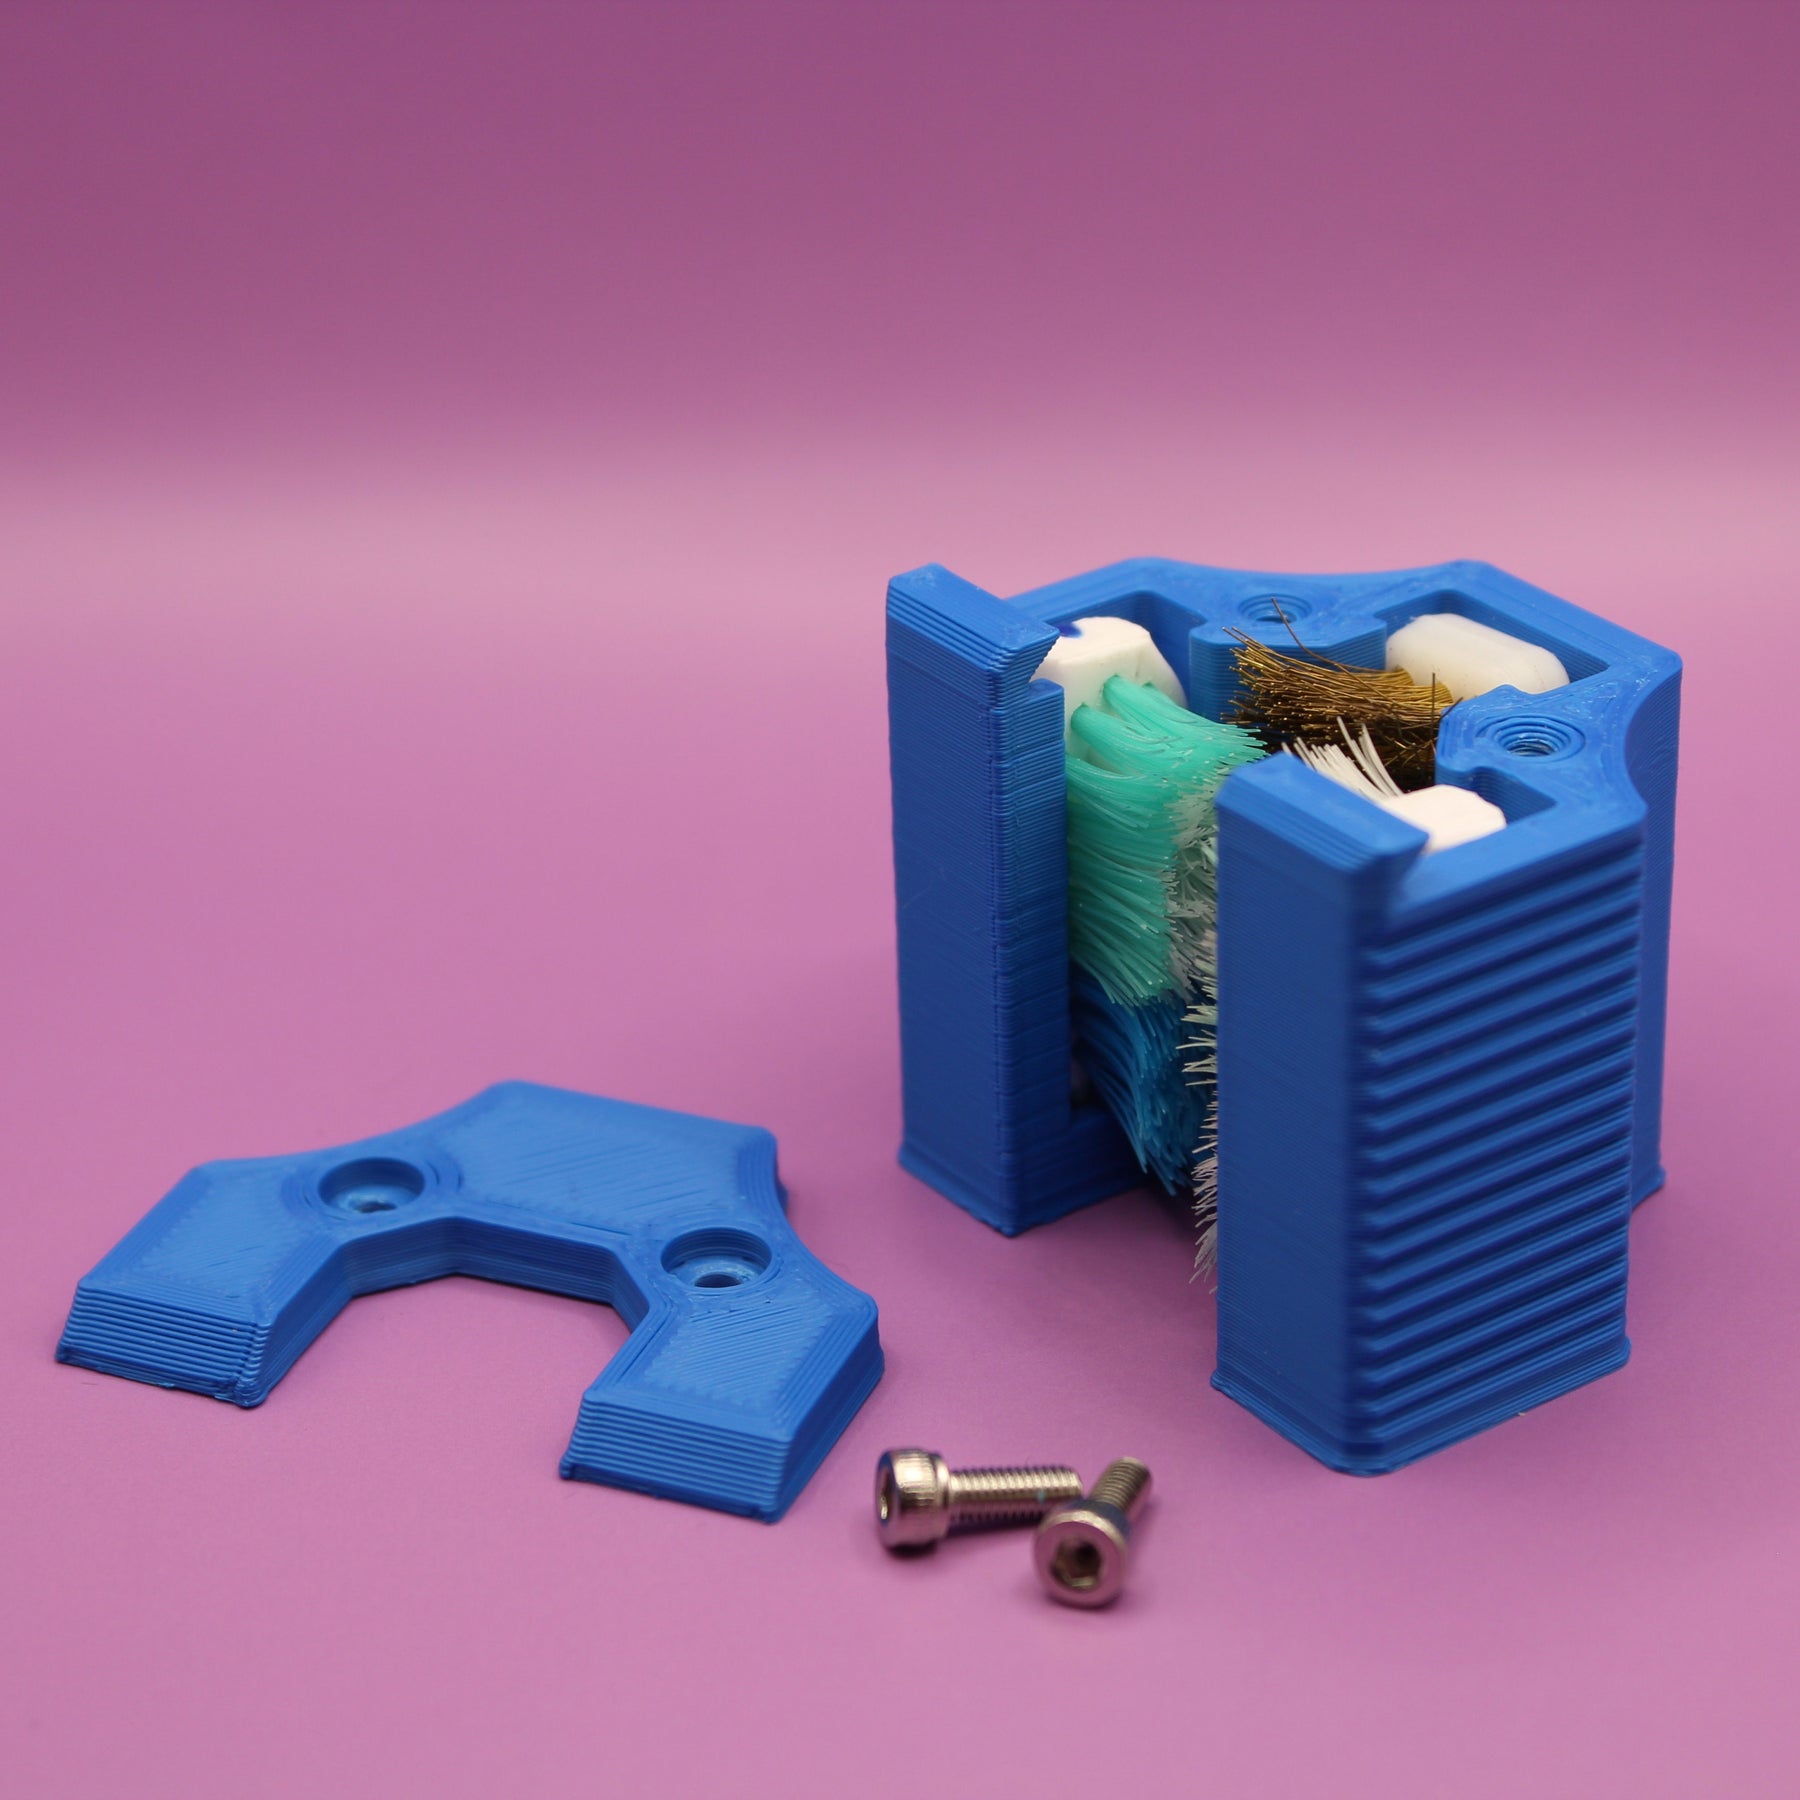 Bike Chain Cleaner (kit of 3d printed parts)